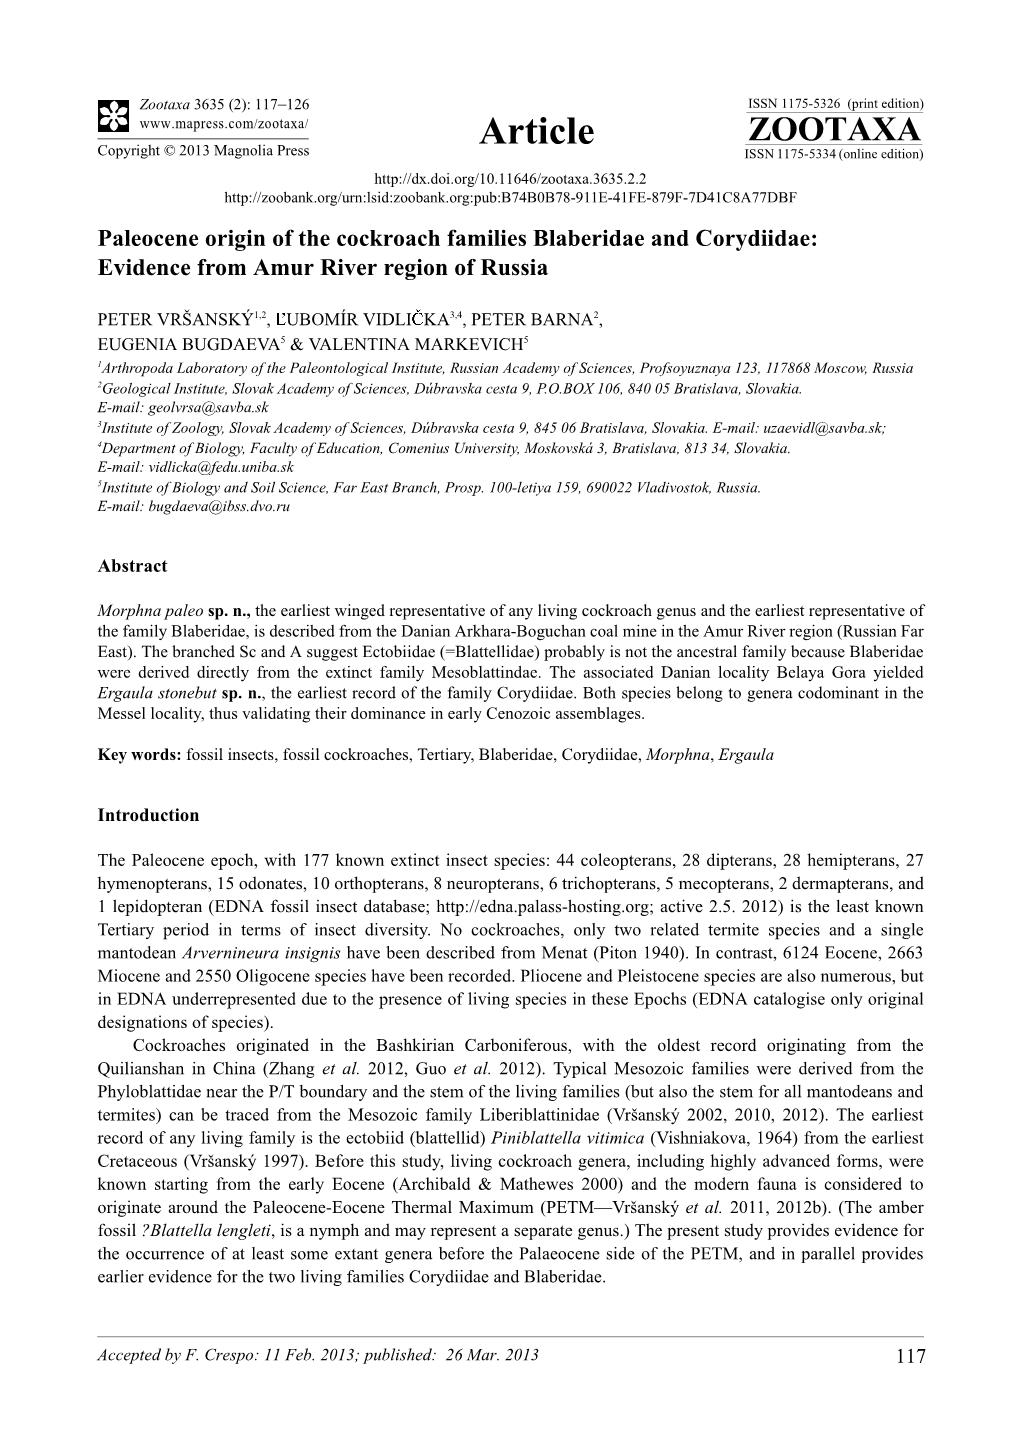 Paleocene Origin of the Cockroach Families Blaberidae and Corydiidae: Evidence from Amur River Region of Russia